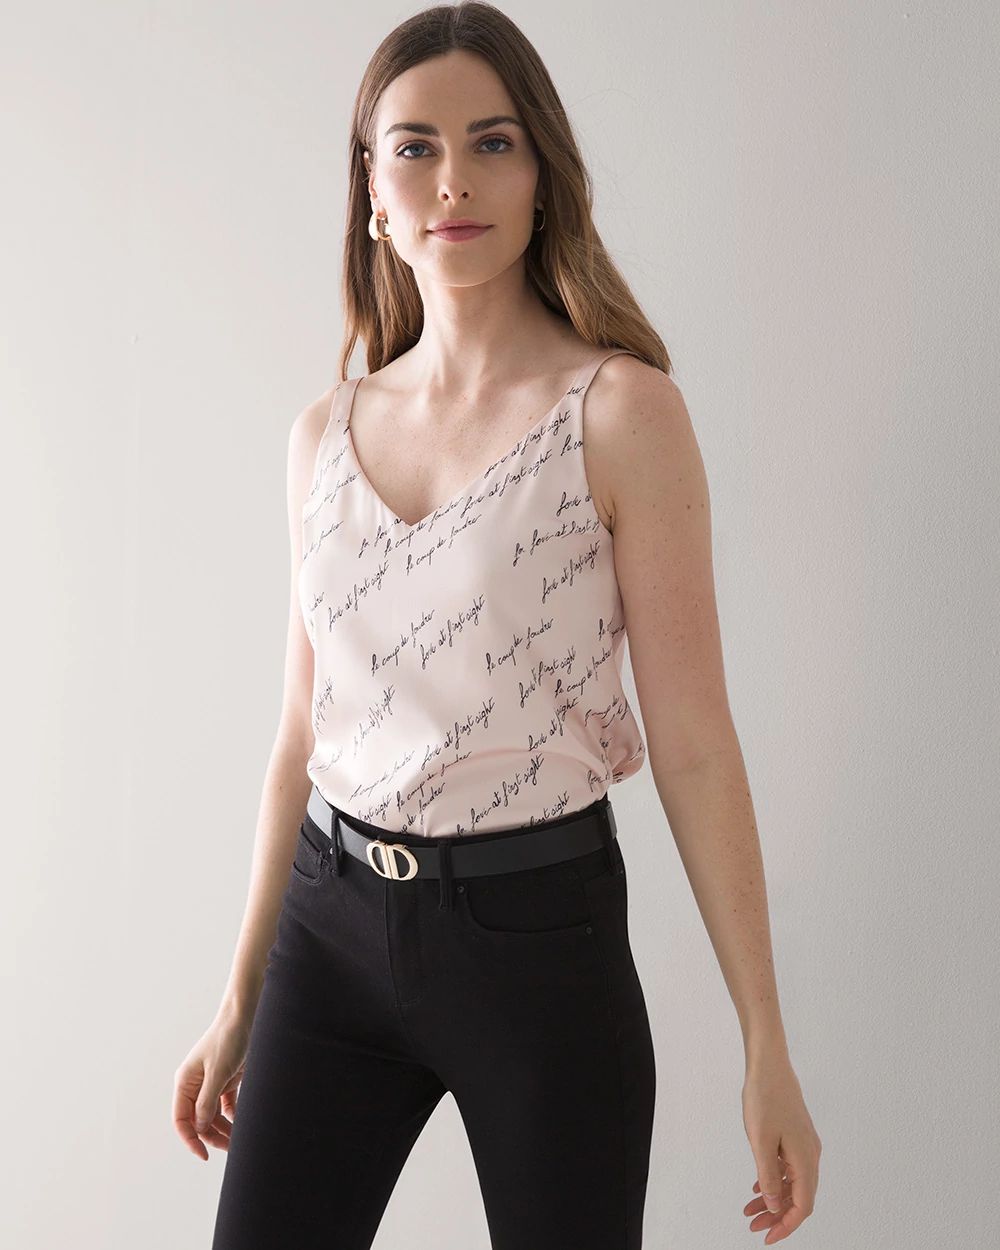 Floral Script Reversible Cami click to view larger image.